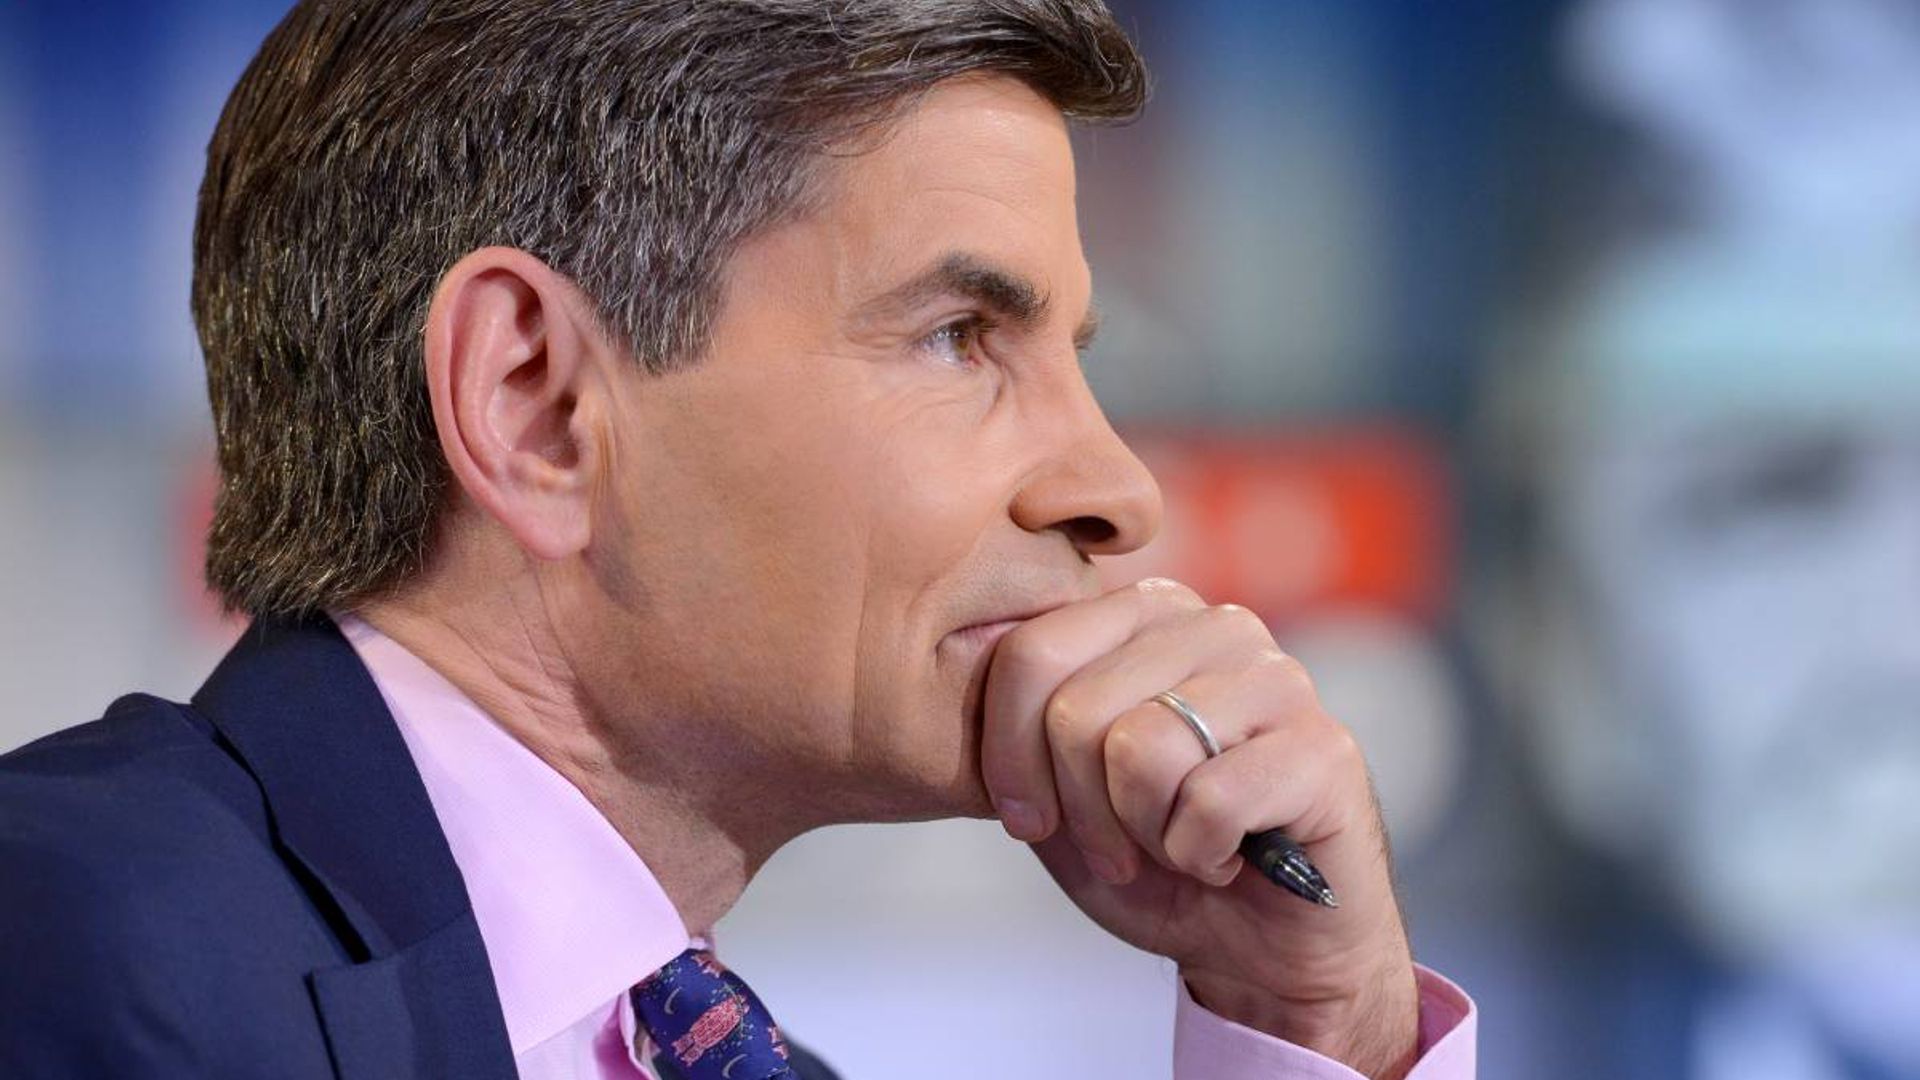 GMA's George Stephanopoulos says 'it's been a great run' during emotional career chat